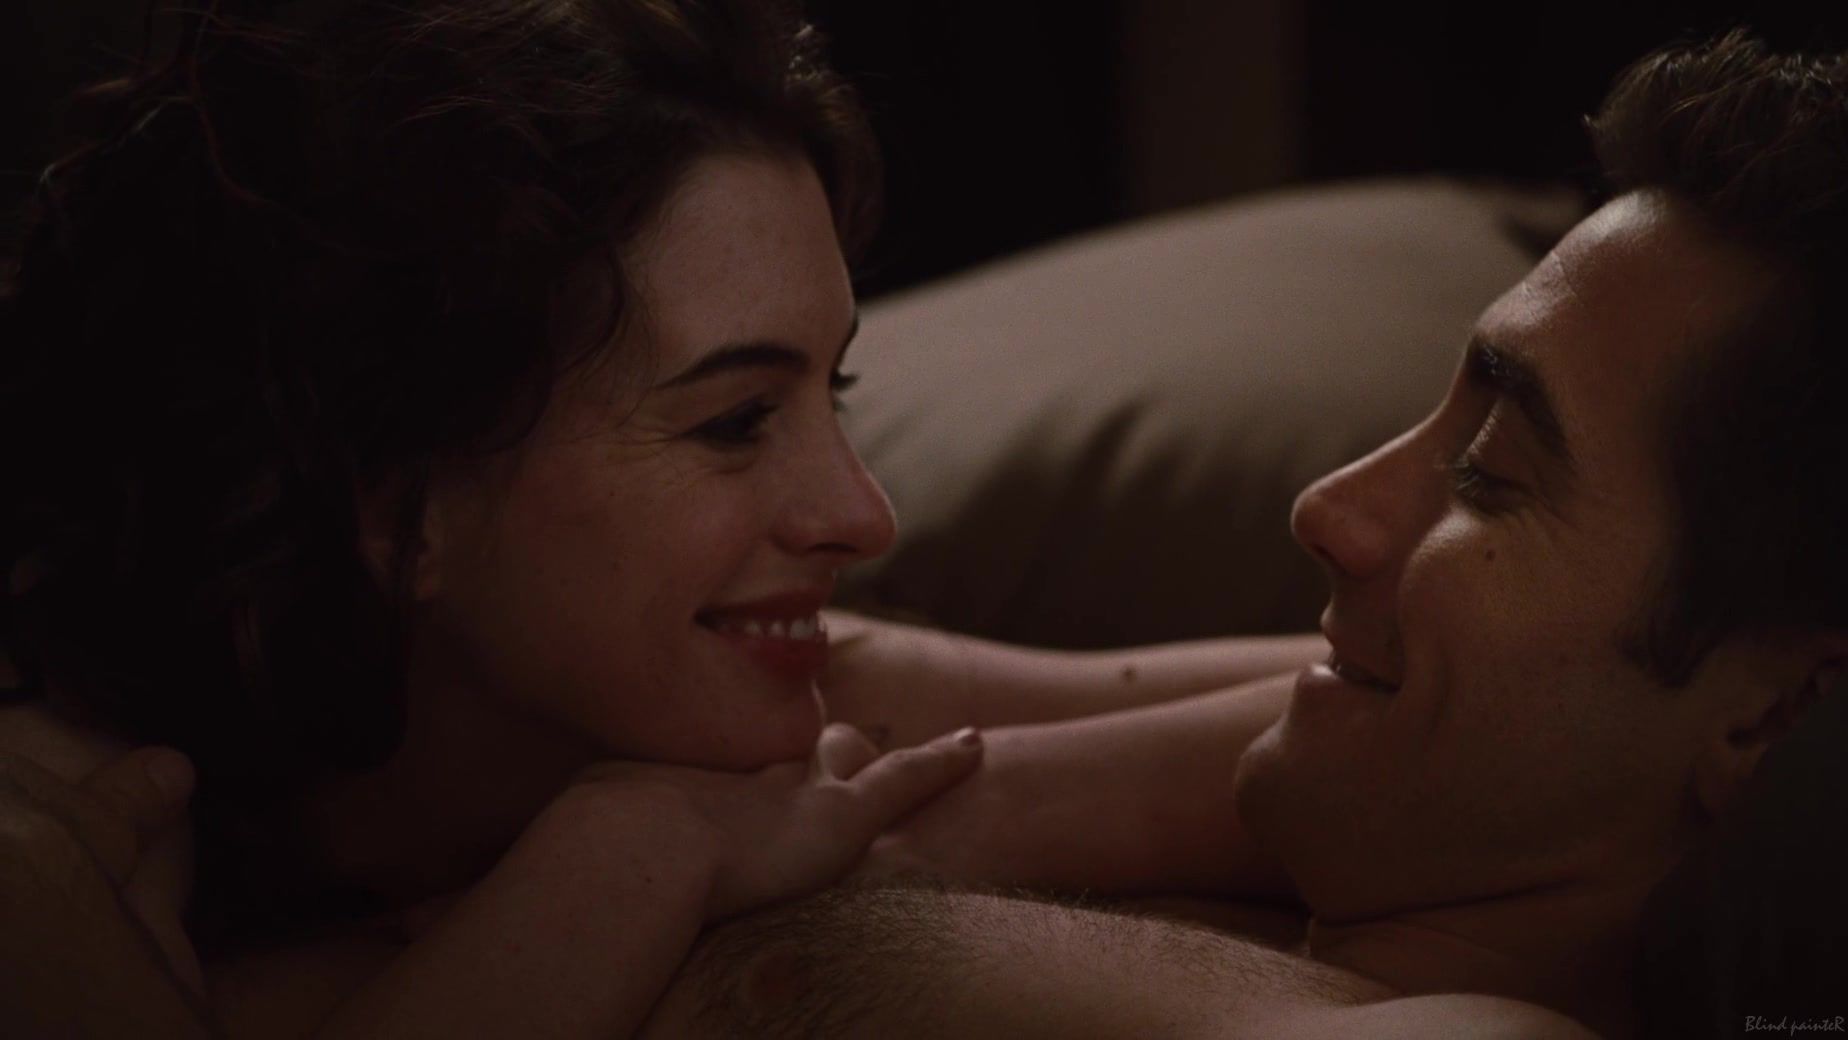 YesPornPlease Anne Hathaway nude - Love and Other Drugs (2010) Onlyfans